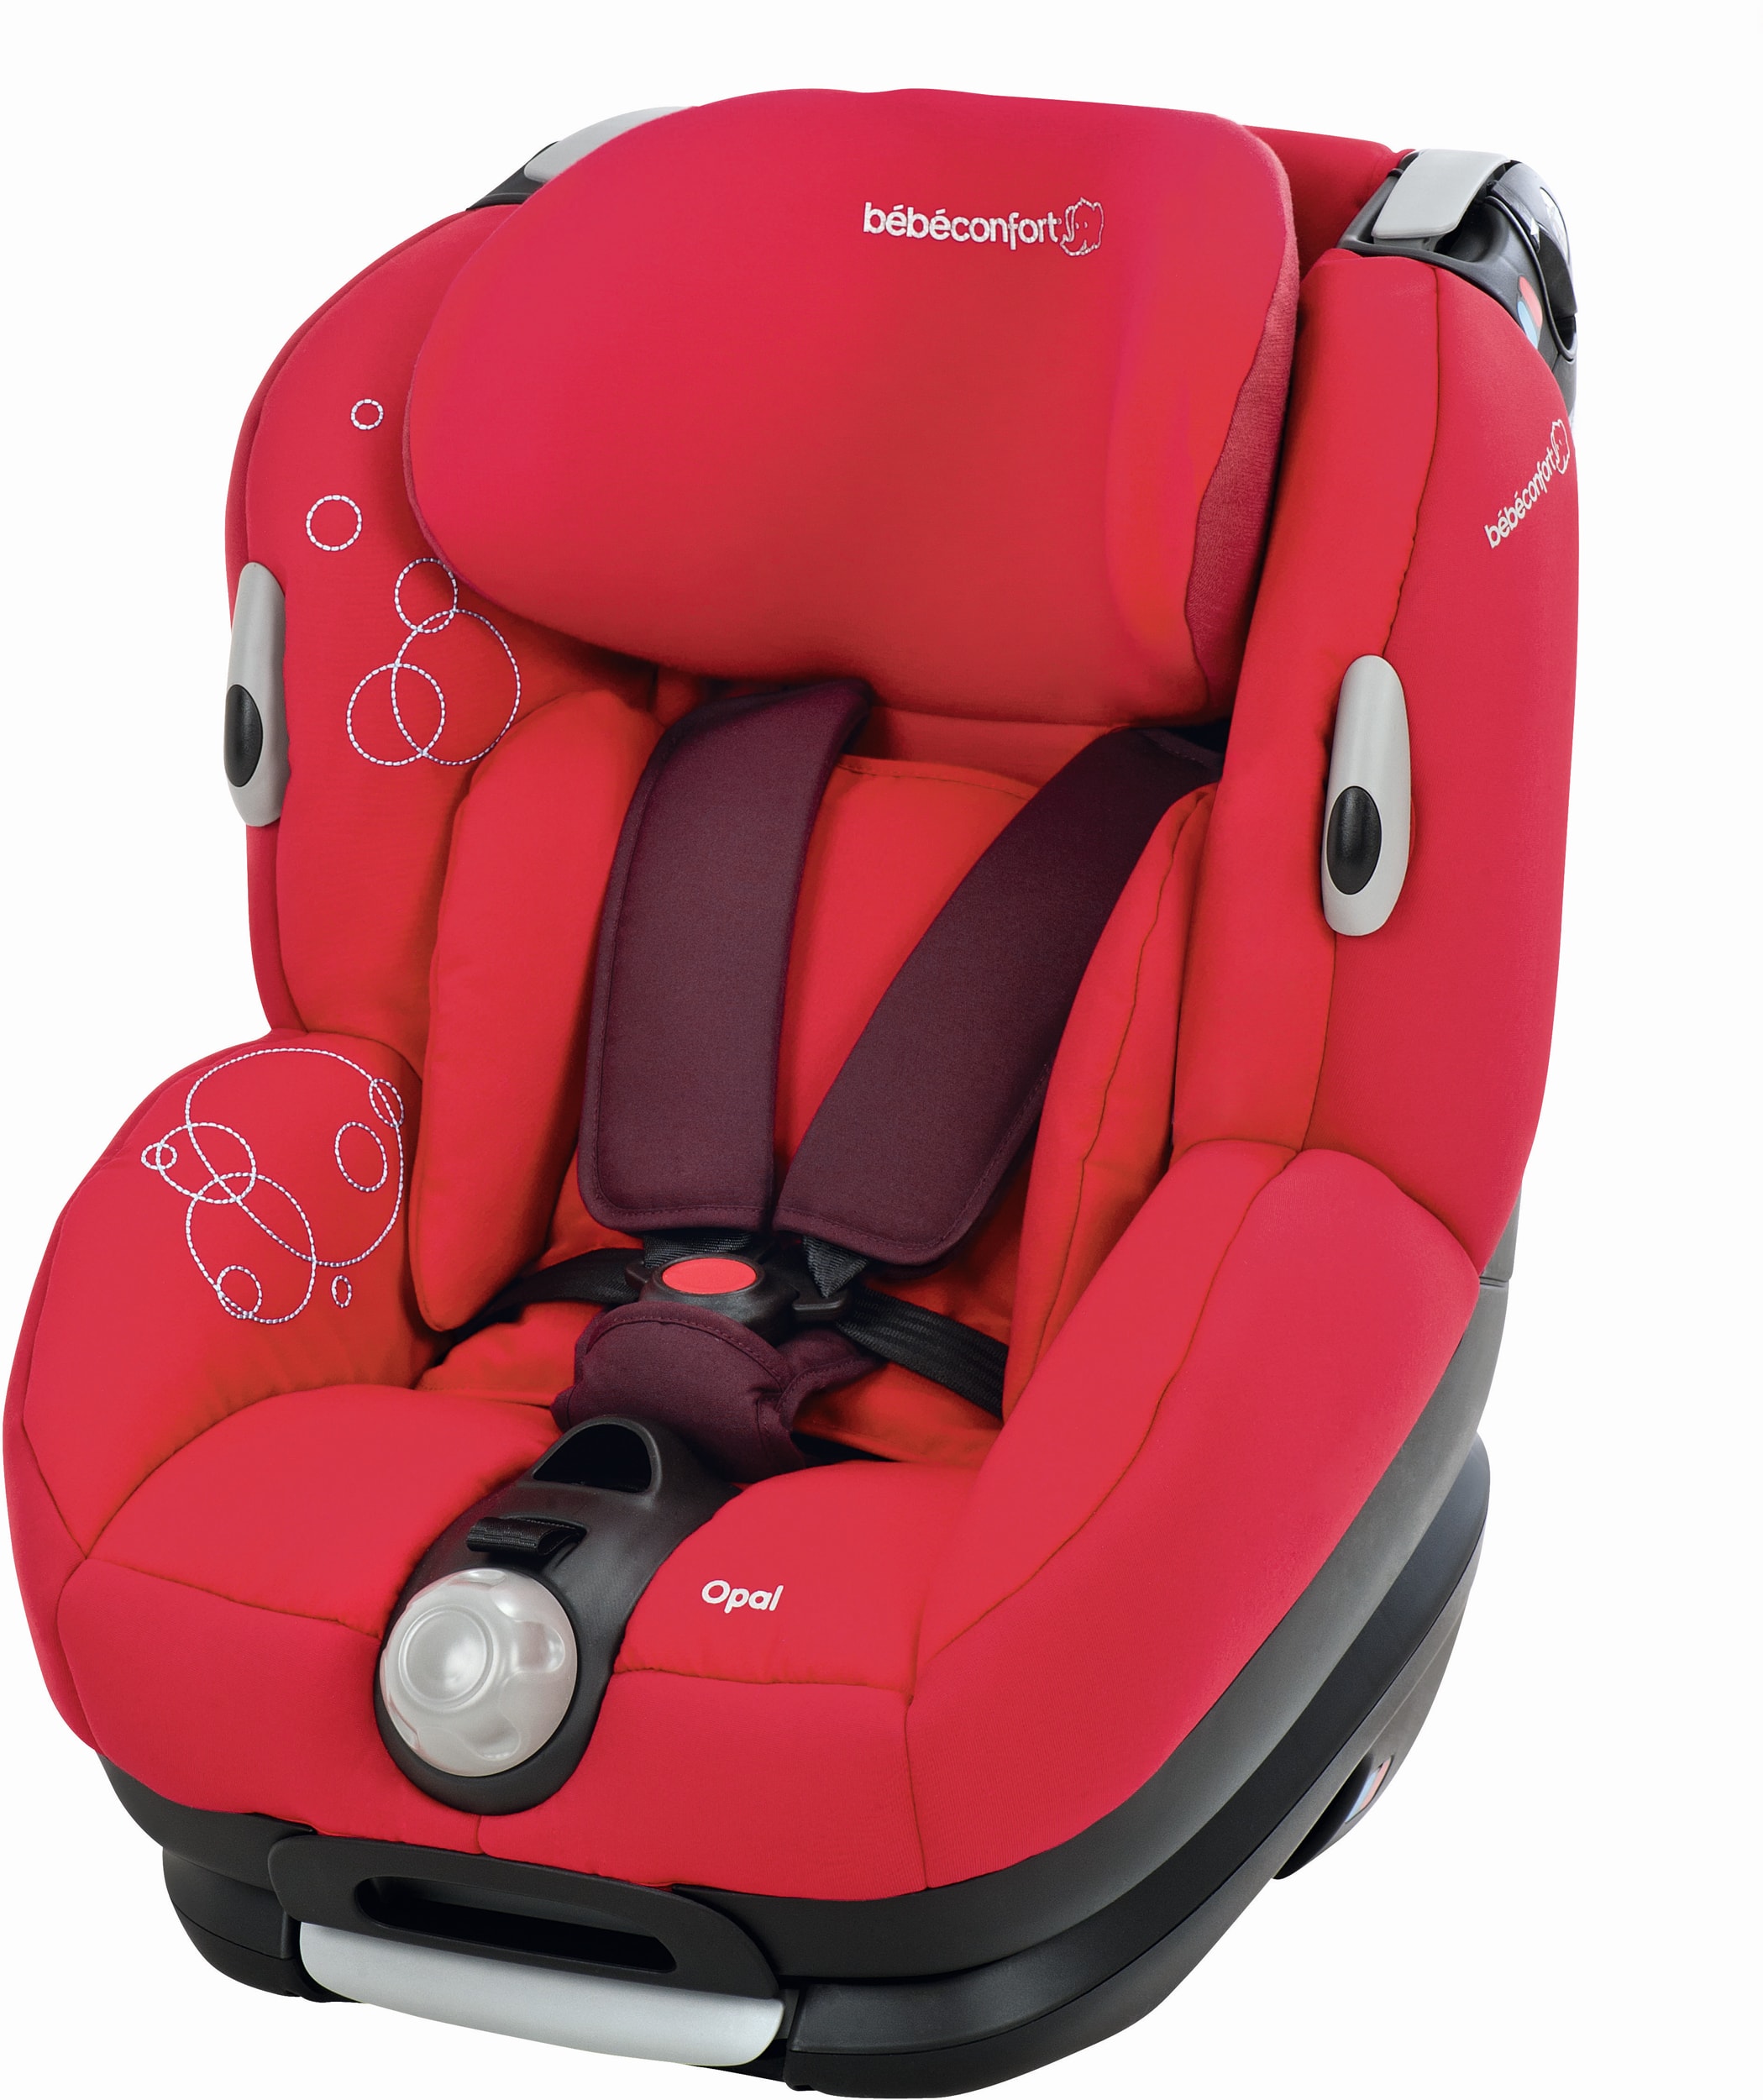 BEBE CONFORT - Siège auto groupe 0+/1 Opal intense red collection 2013 -  85255950